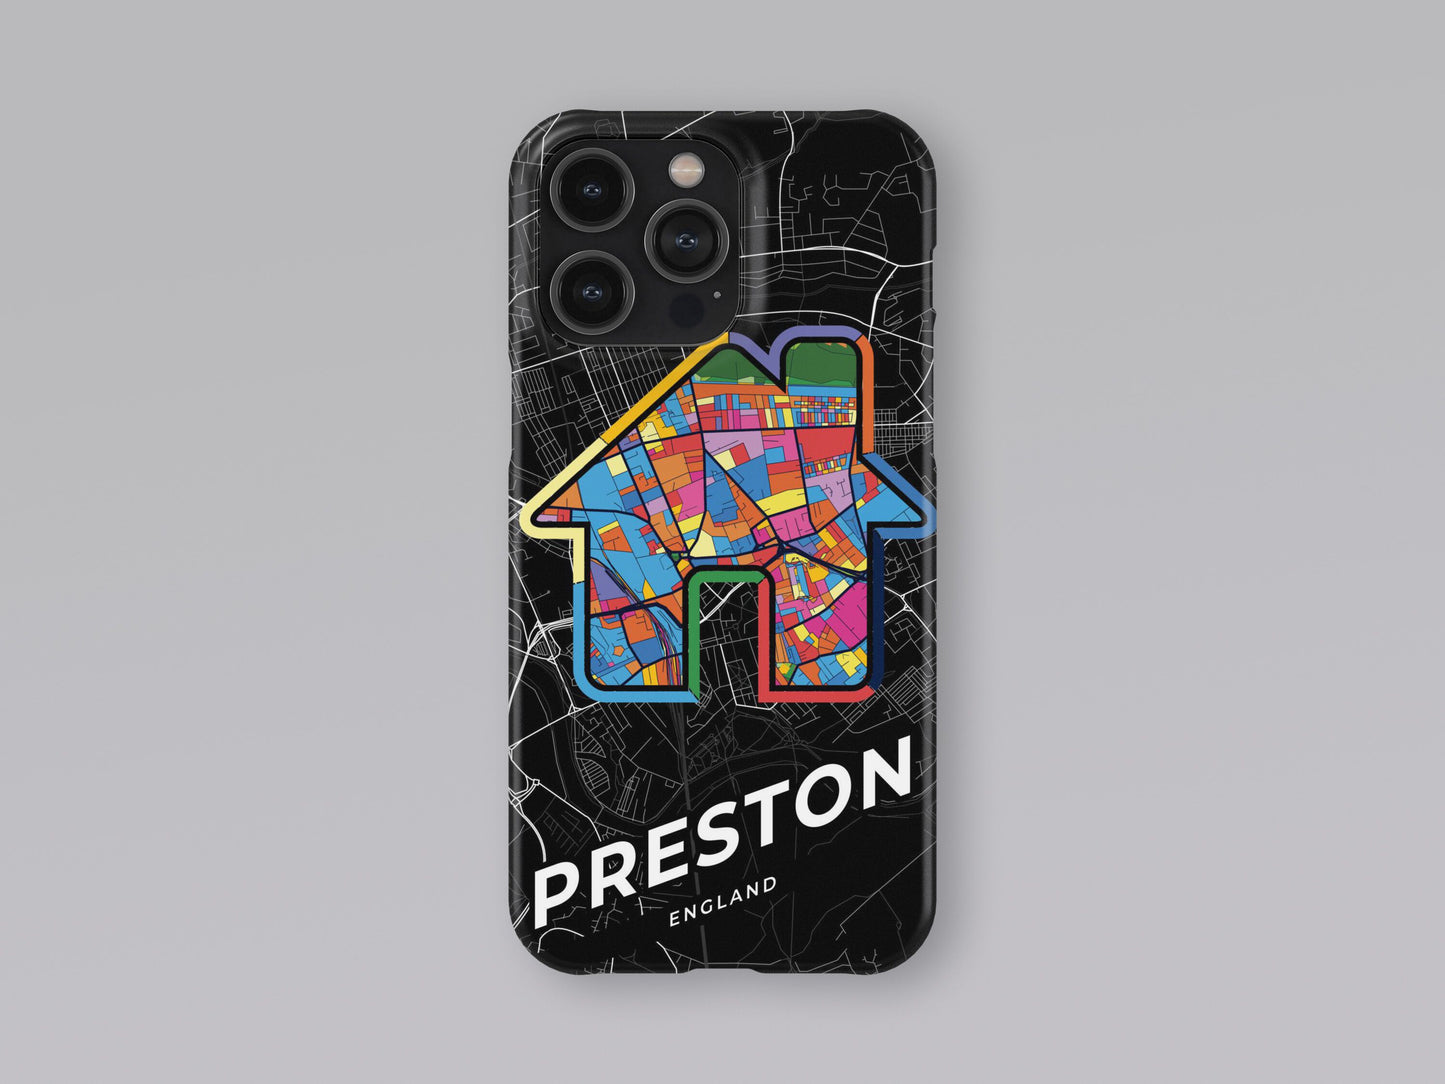 Preston England slim phone case with colorful icon. Birthday, wedding or housewarming gift. Couple match cases. 3